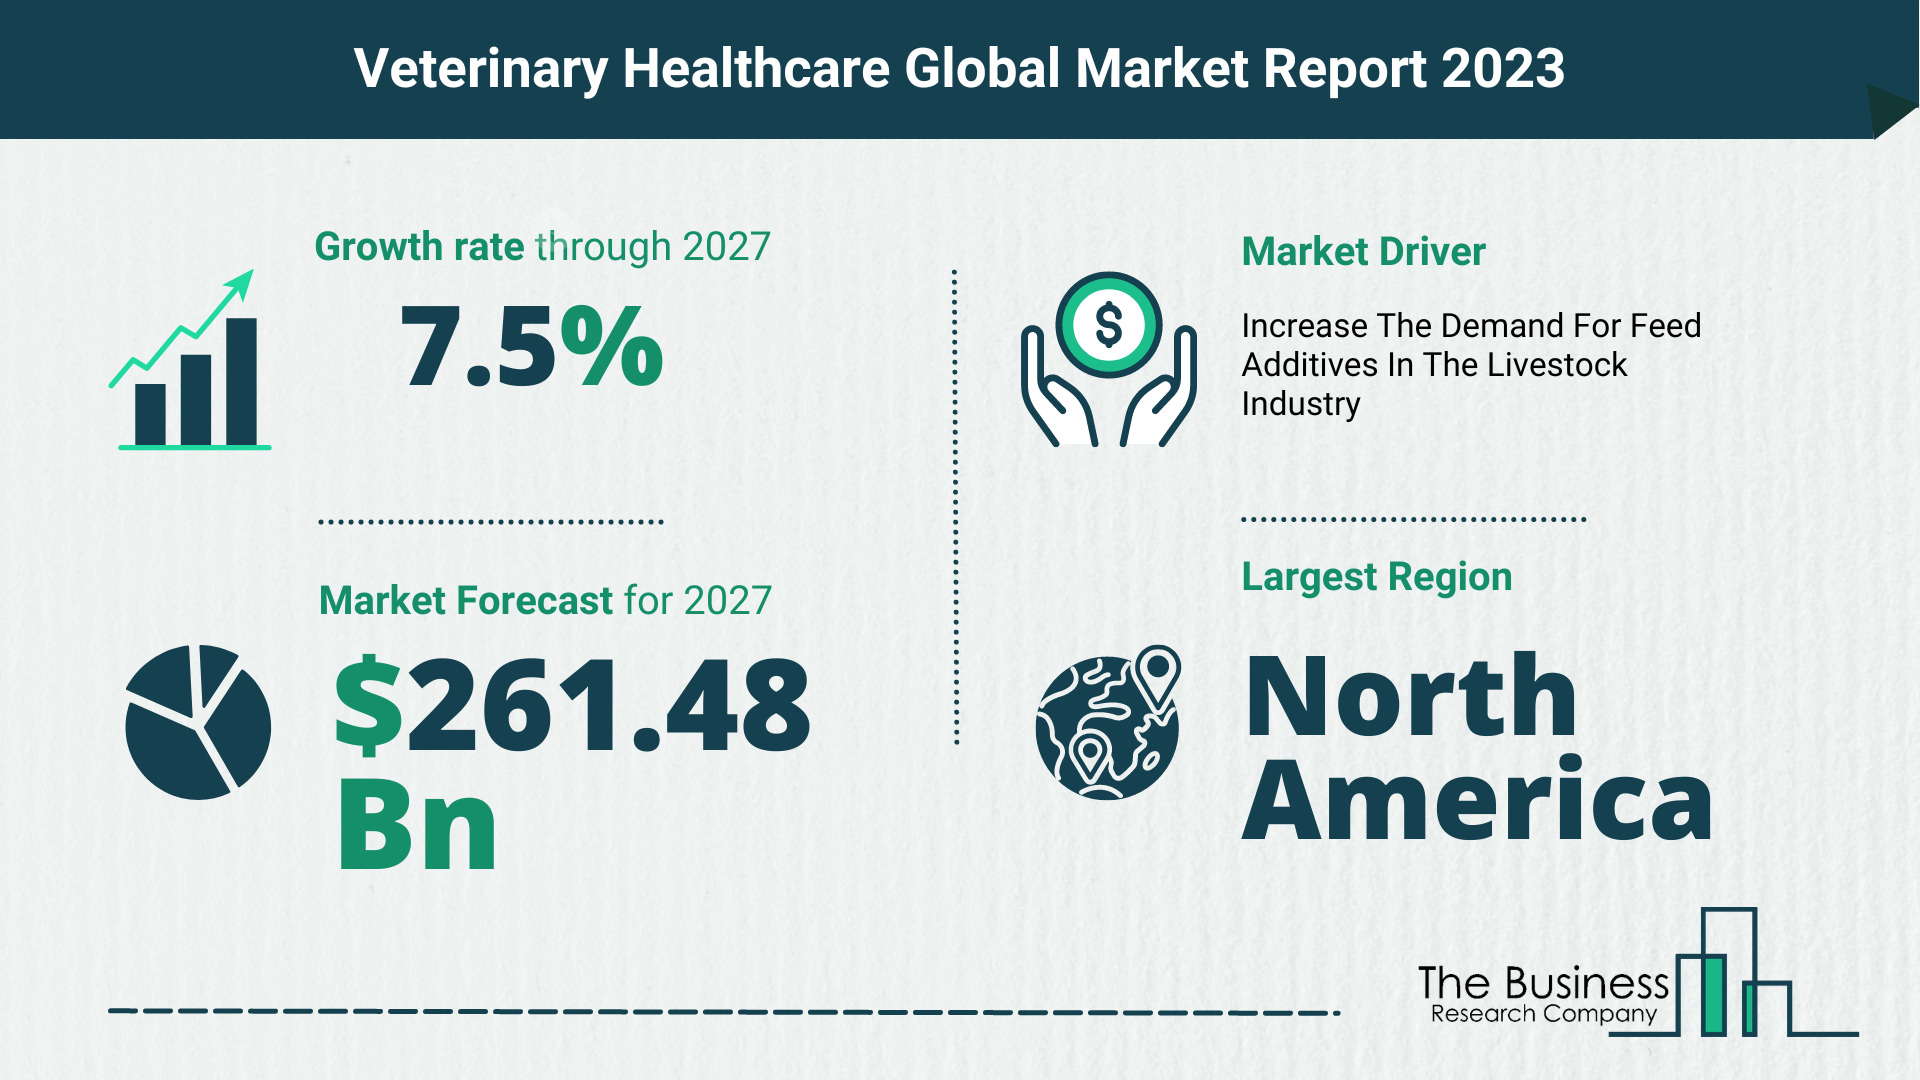 What Will The Veterinary Healthcare Market Look Like In 2023?